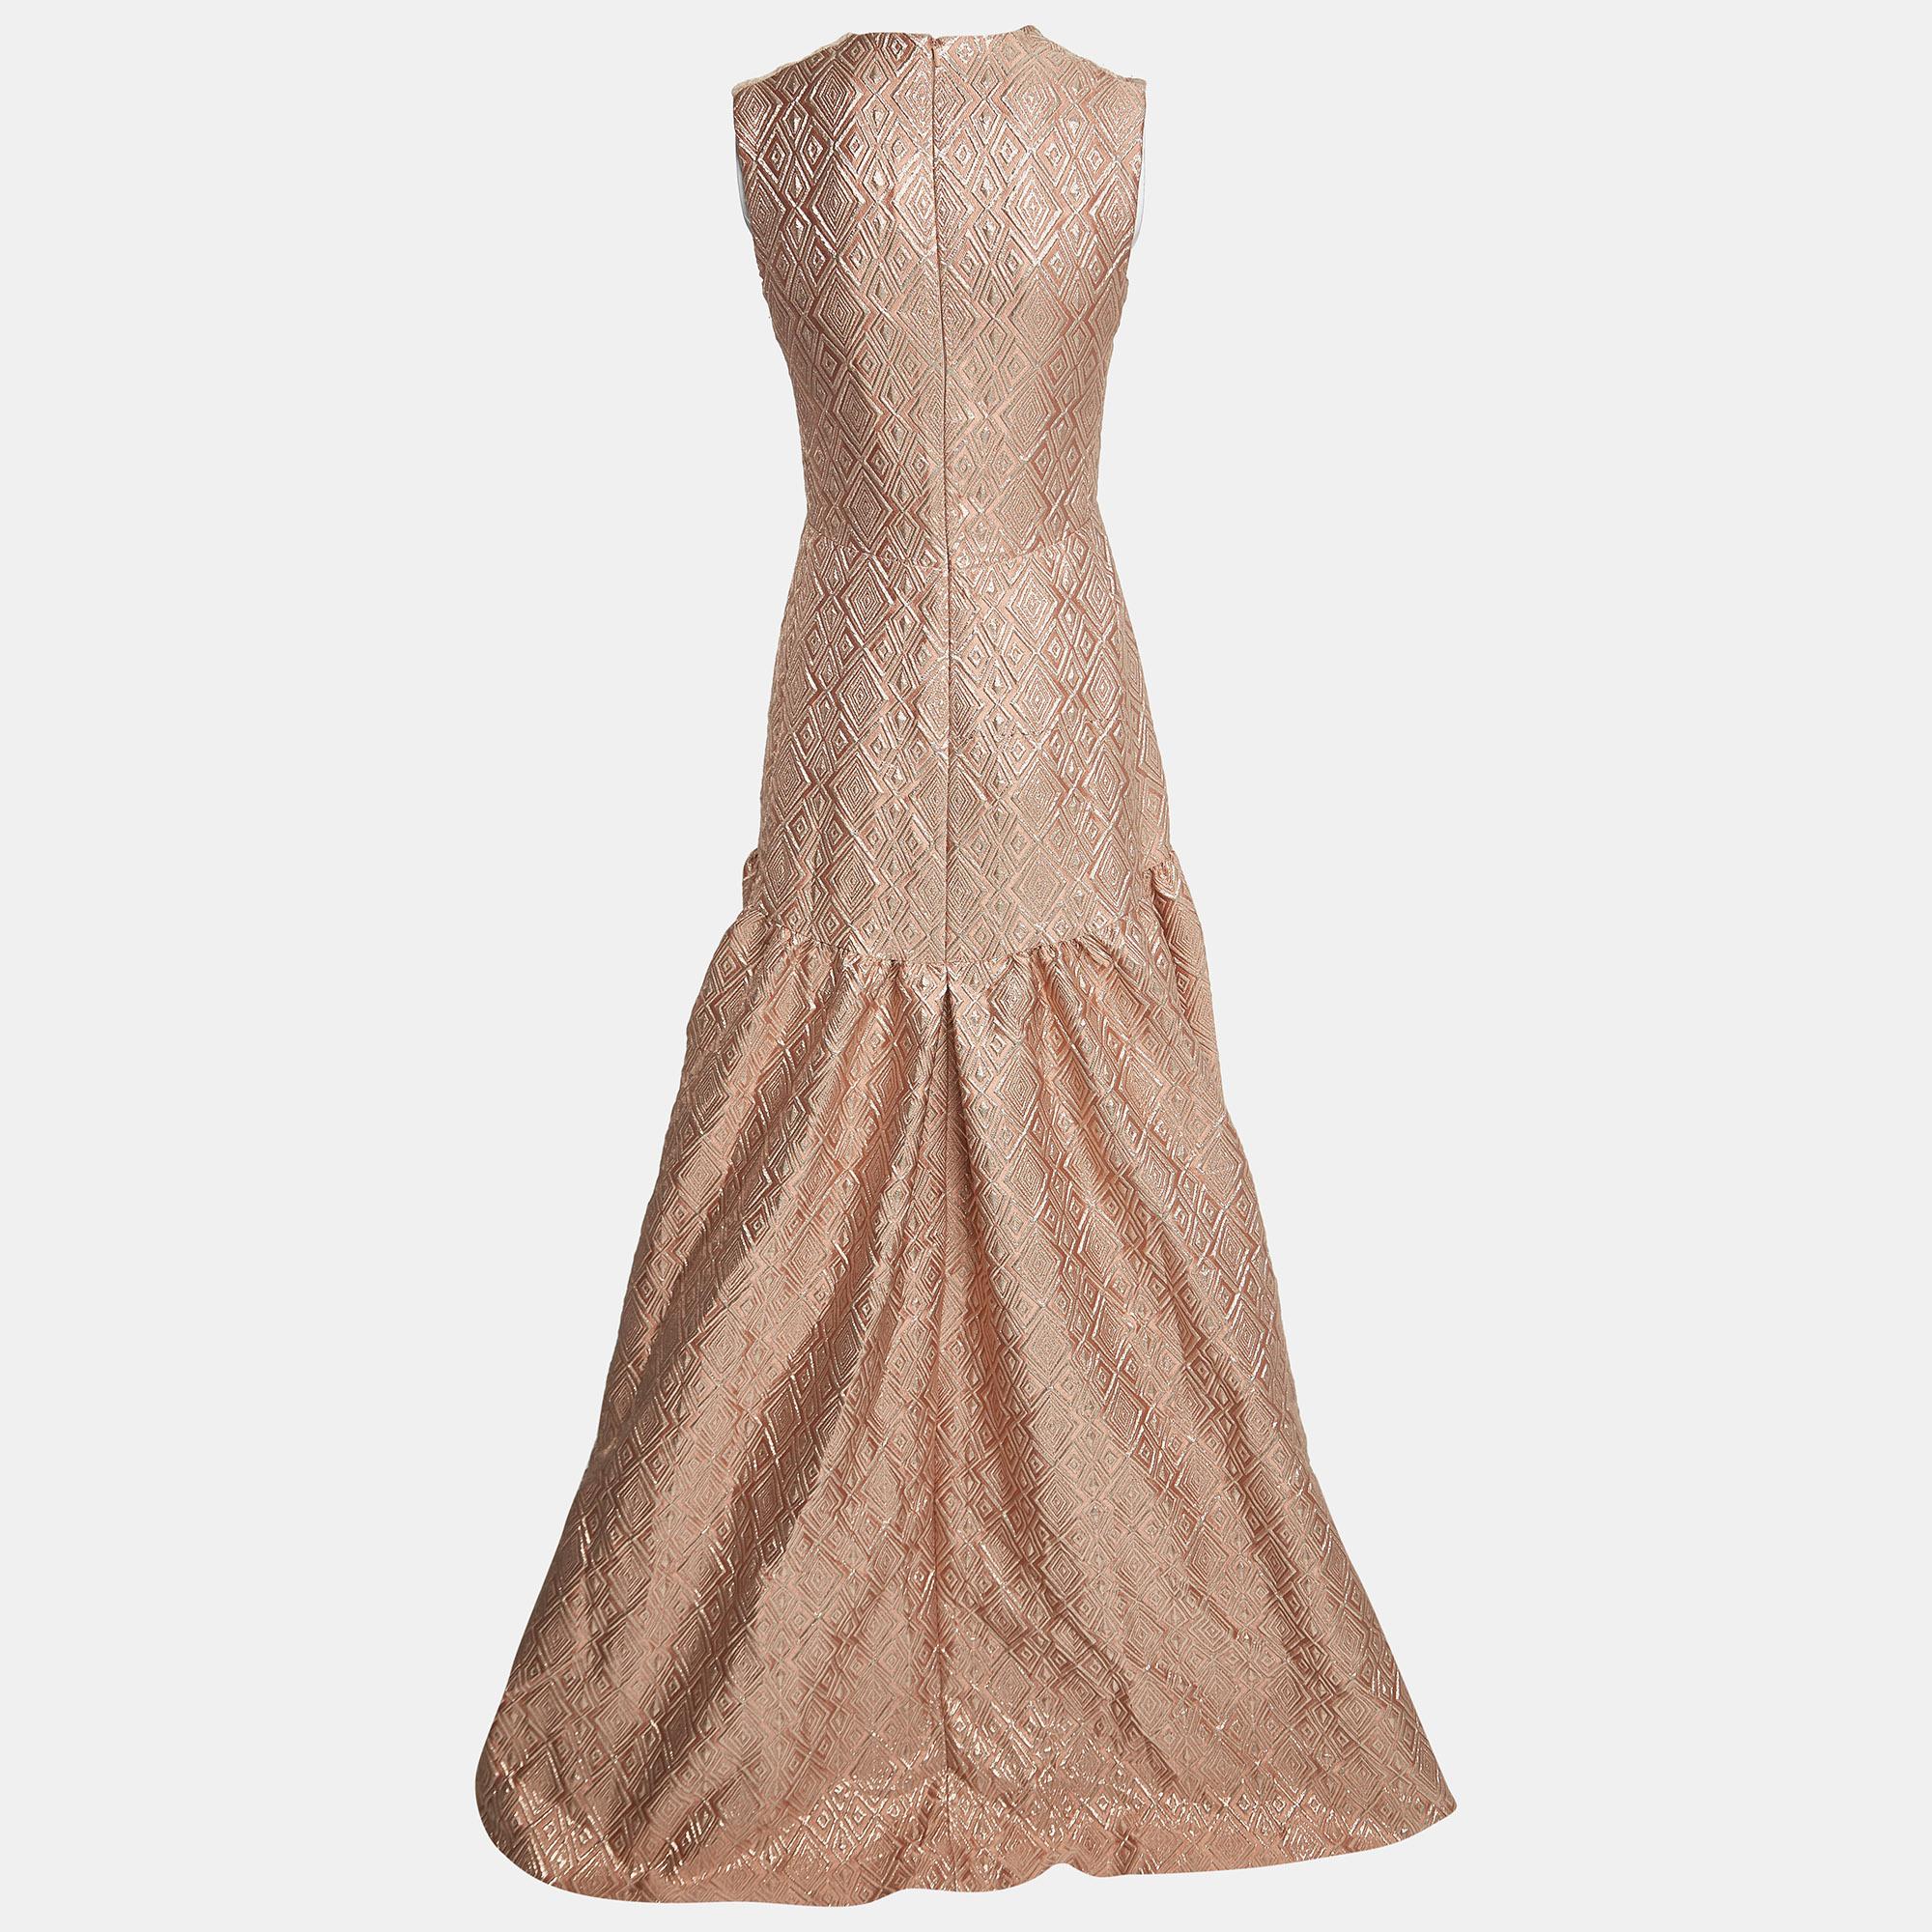 To help you sway in the most mesmerizing way, Max Mara brings you this evening gown. It is a marvelous design, achieved by using jacquard fabric in a dreamy silhouette. The hemline falls gracefully to the floor and a zipper makes sure the gown fits